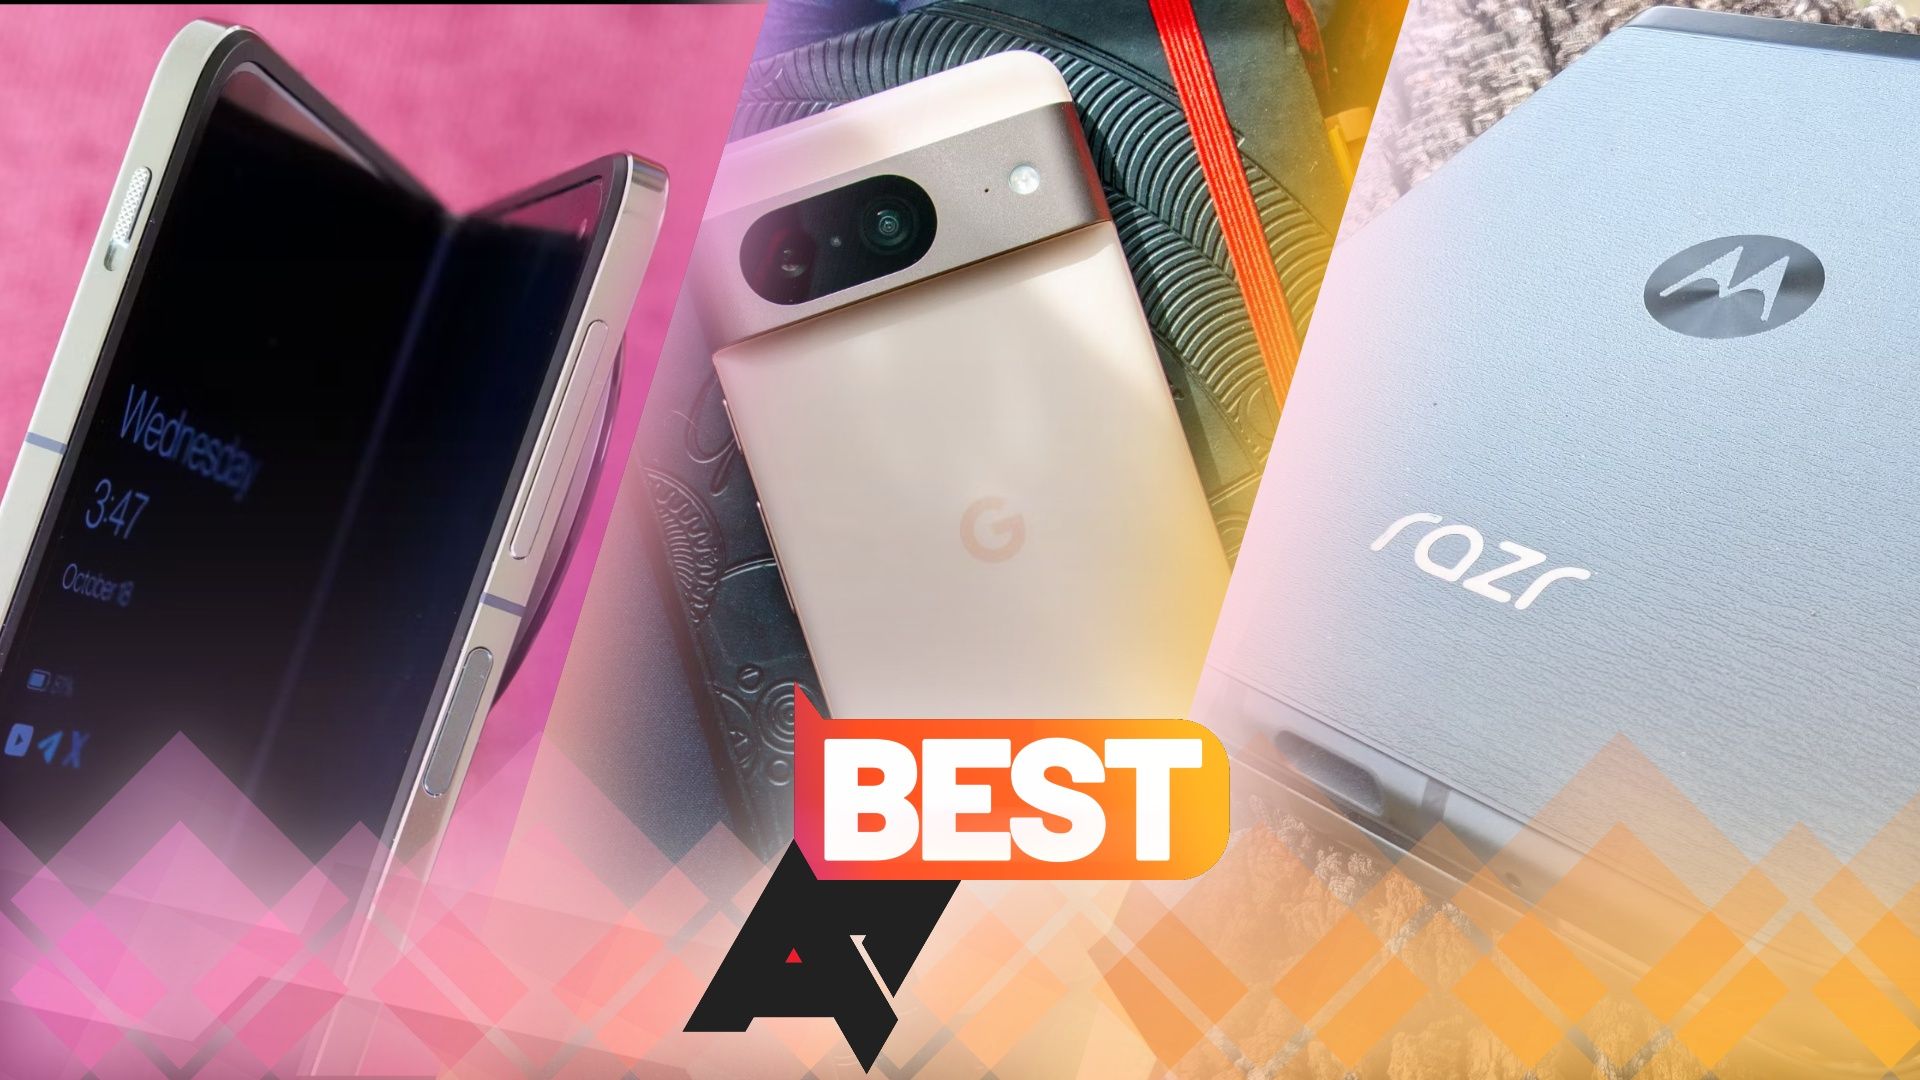 A collage of three Android phones, including a foldable, a Google Pixel, and a Motorola Razr, with an 'AP Best' logo